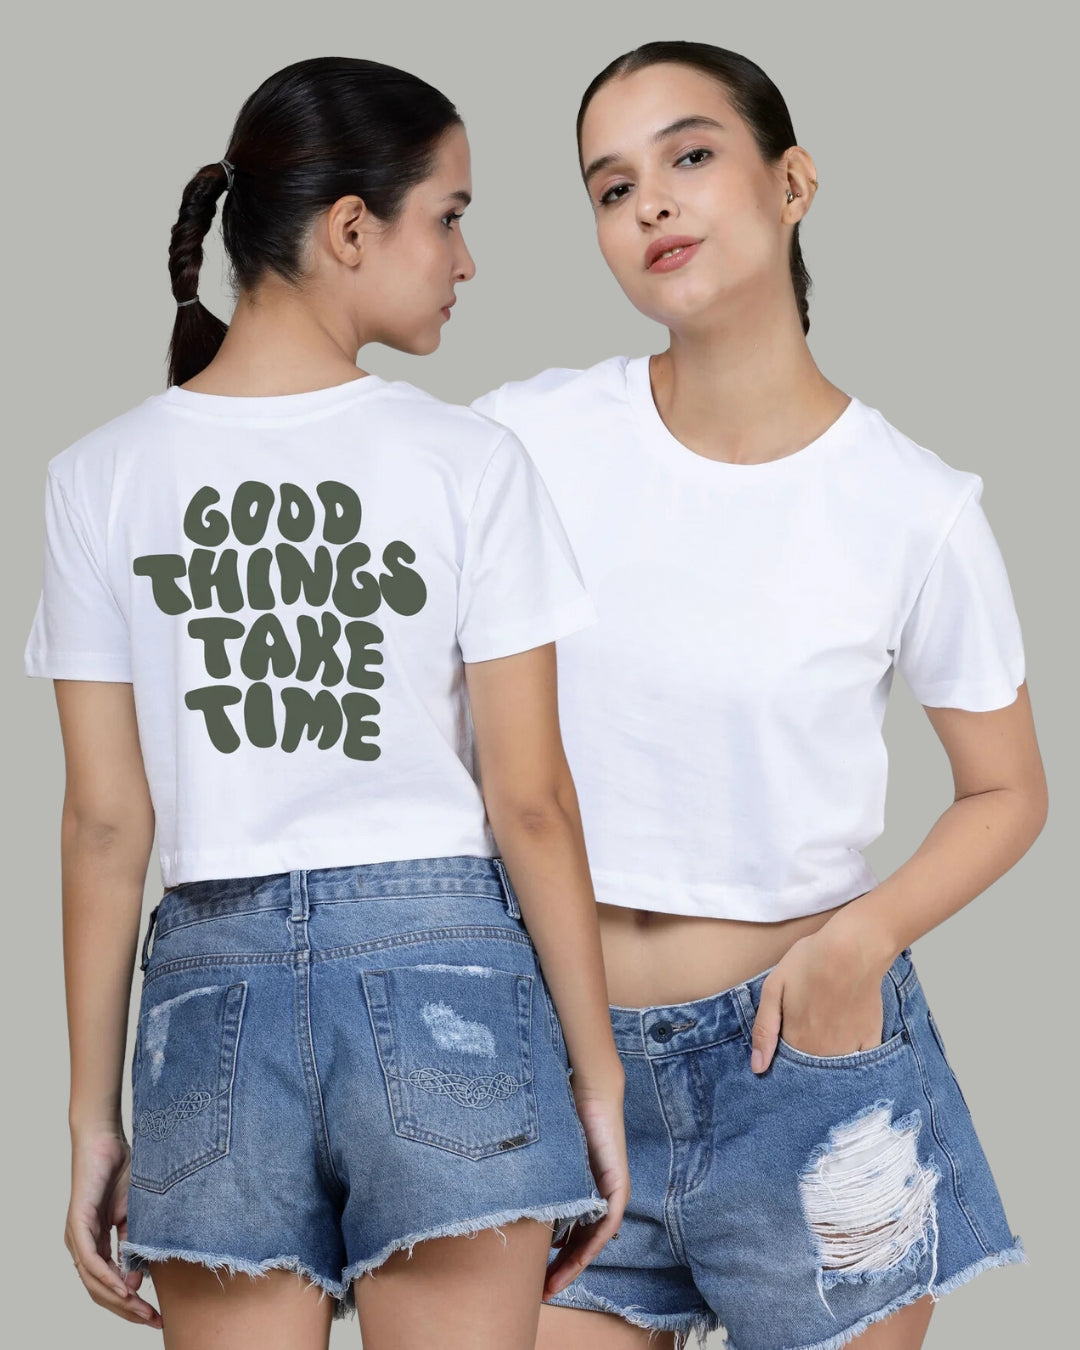 Good things takes time Radiant White - Printed Crop Top